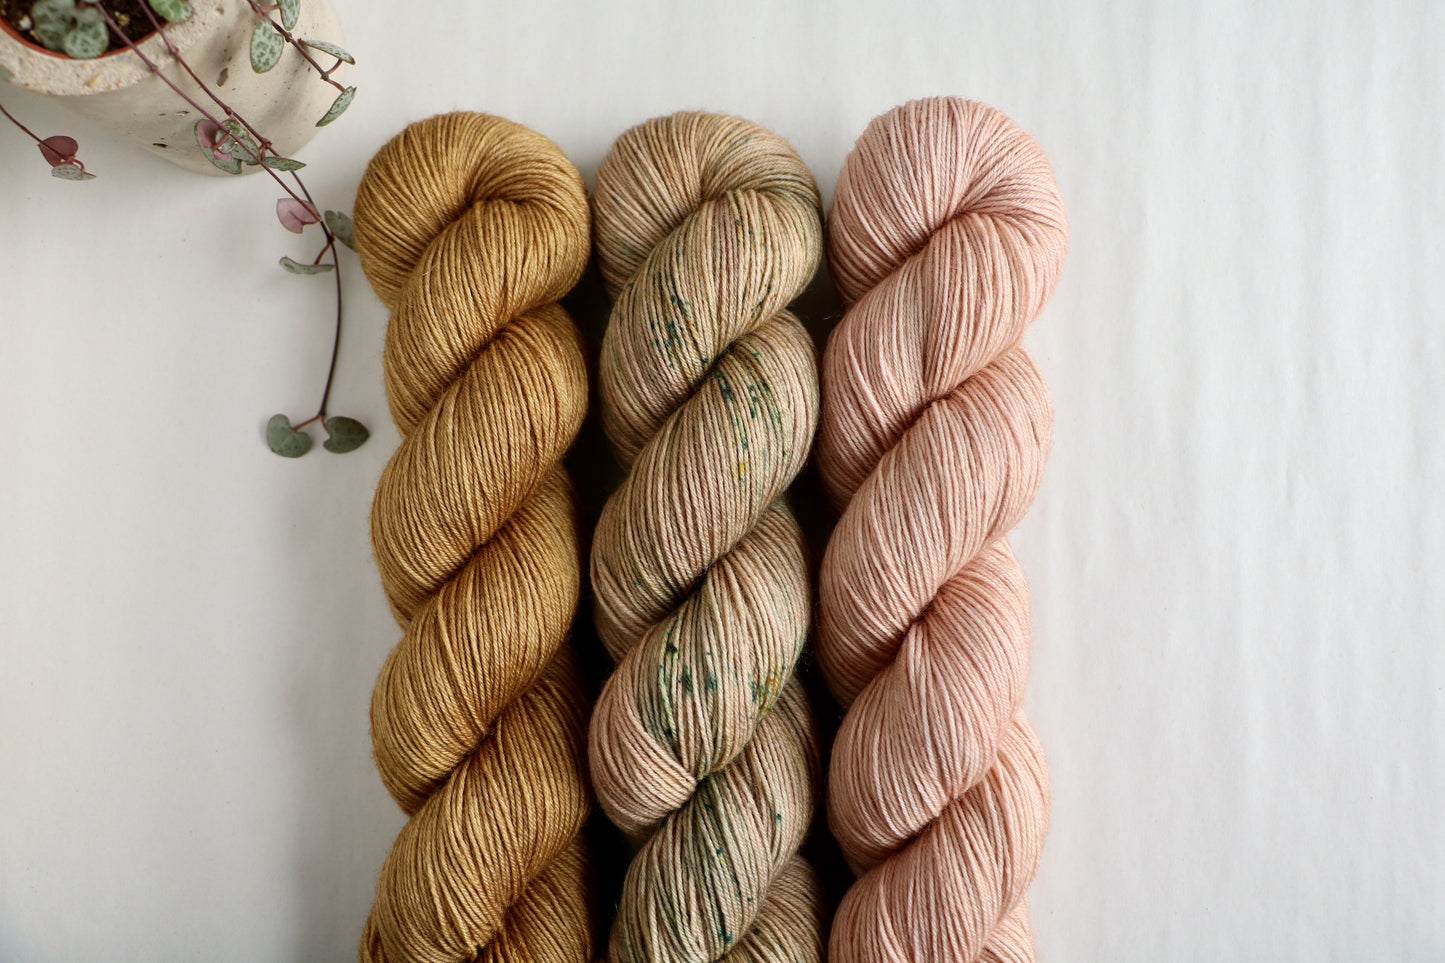 Three colours from summer 22 colection hand dyed on BFL yarn. Glow, Fauna and Blossom.